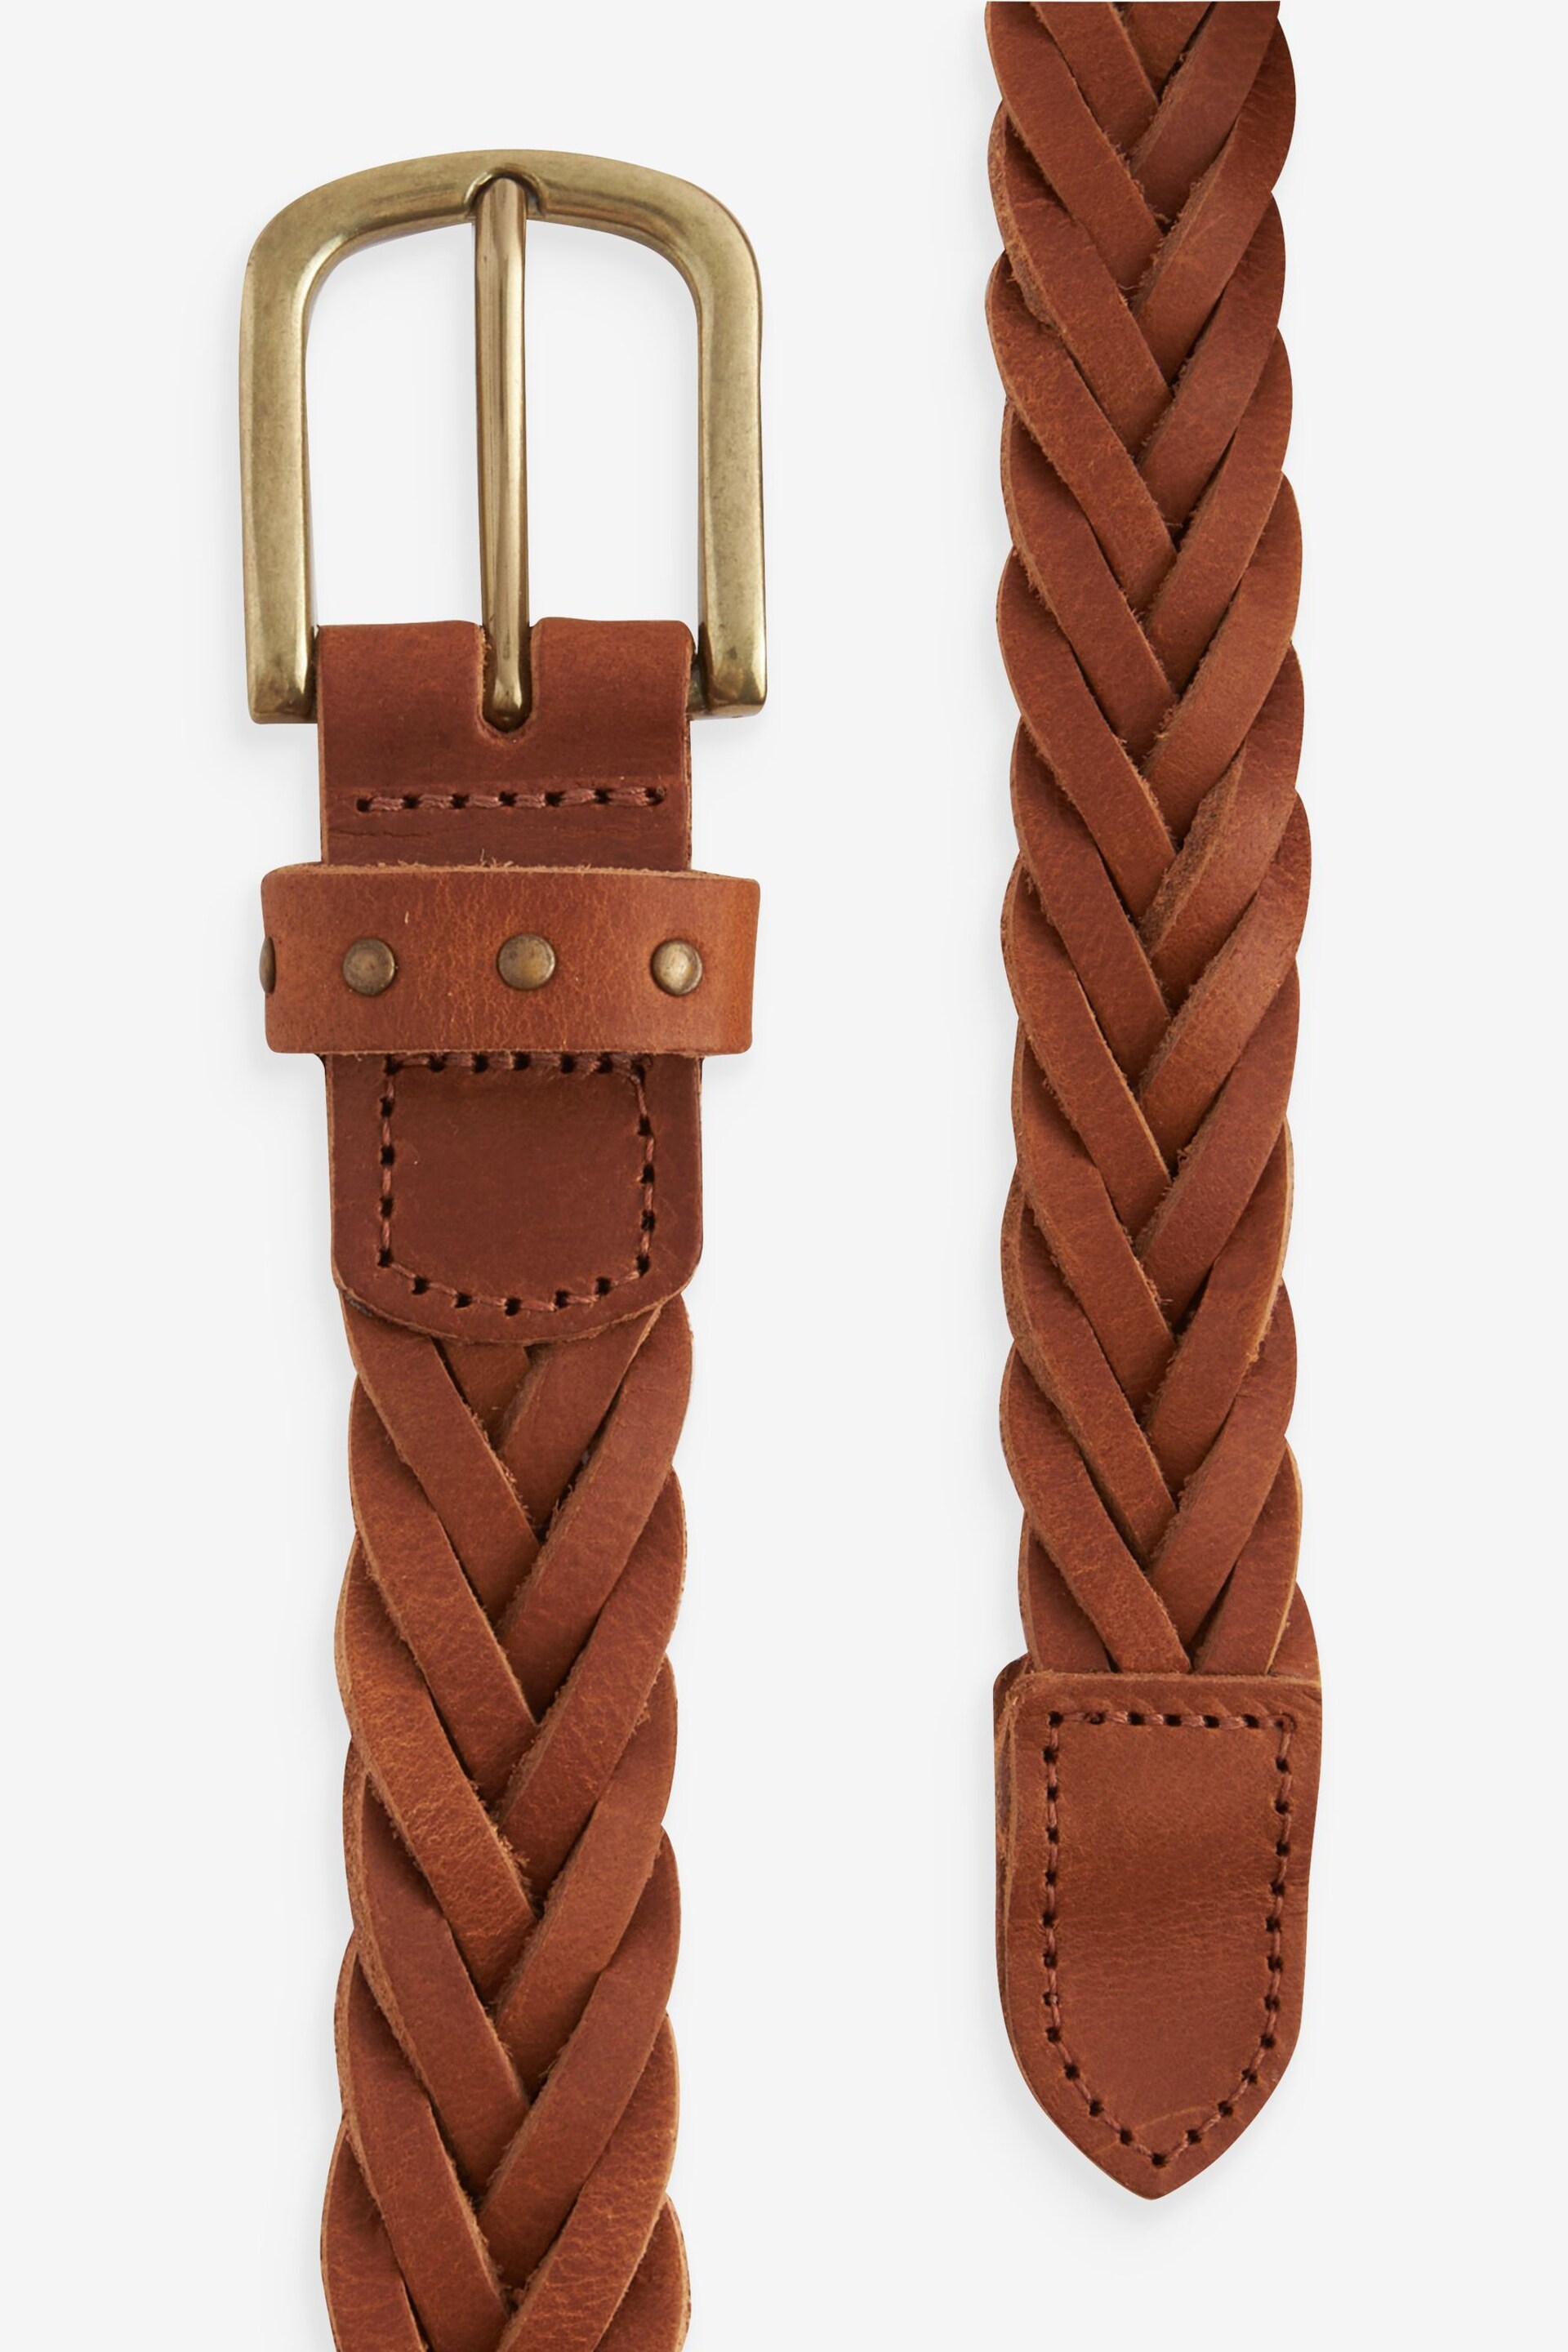 Tan Brown Plaited Leather Belt - Image 2 of 4